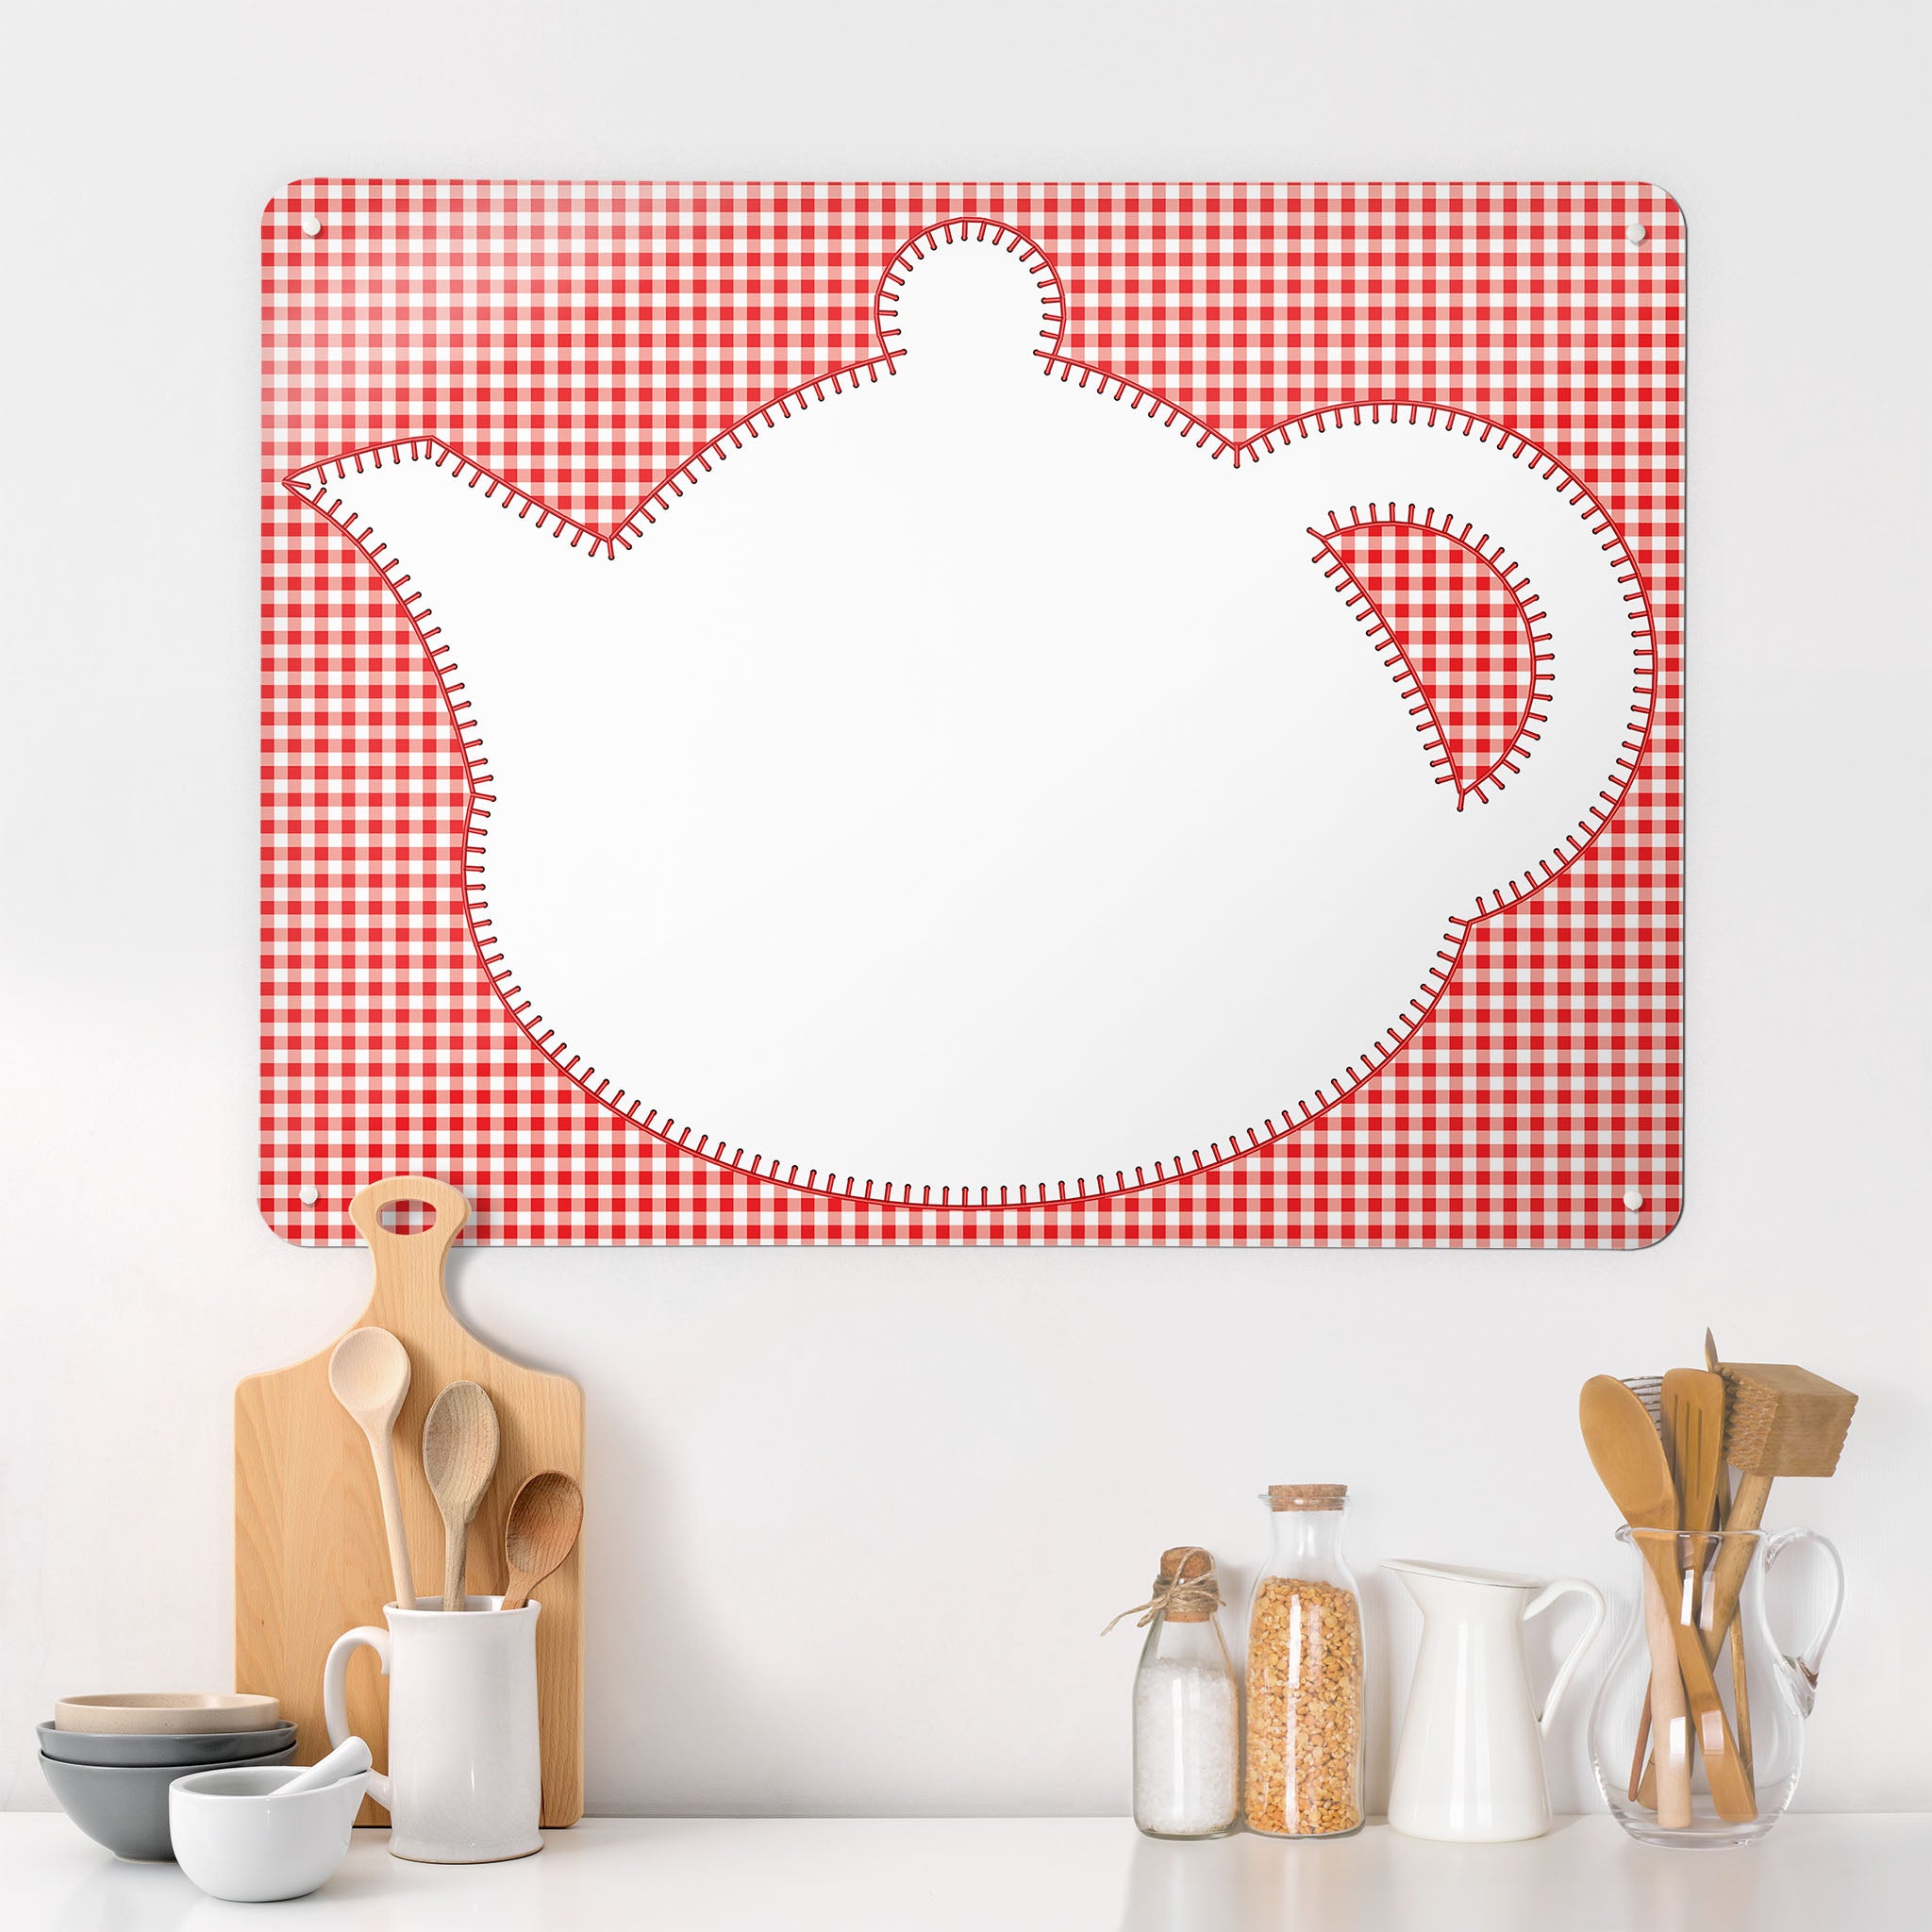 A  kitchen interior with a magnetic metal wall art panel showing an appliqué teapot design in white on a red gingham background